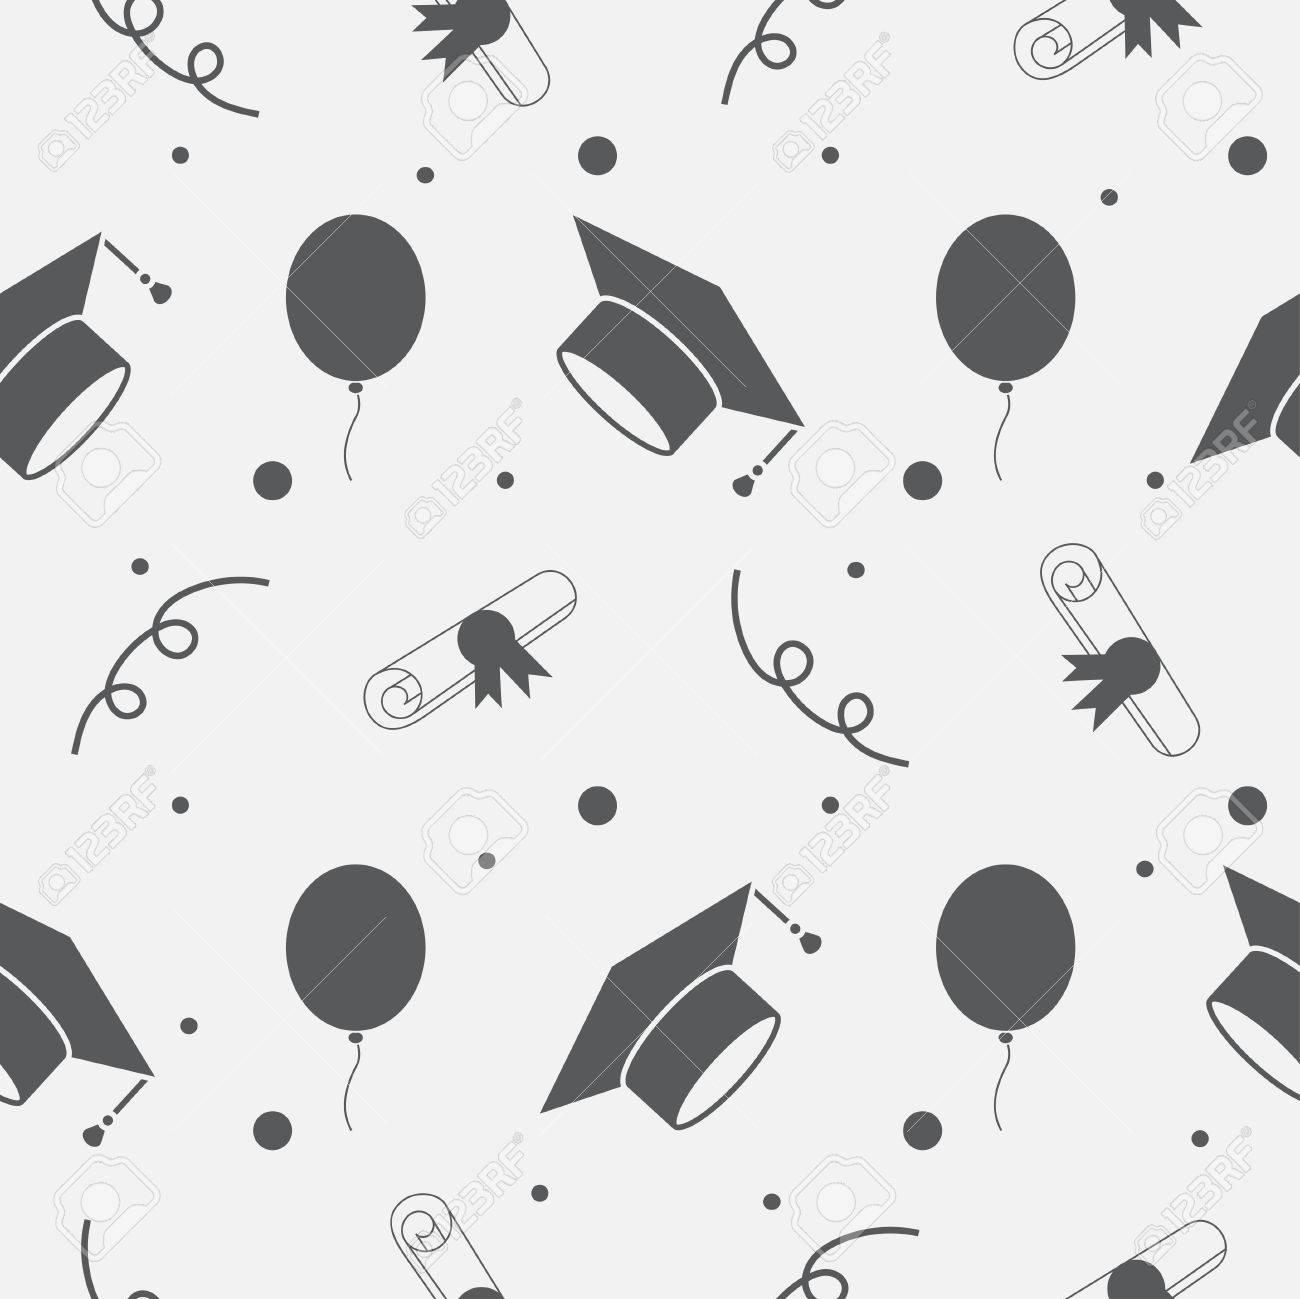 Seamless Vector Backdrop Of Tossing Graduation Caps Balloons And